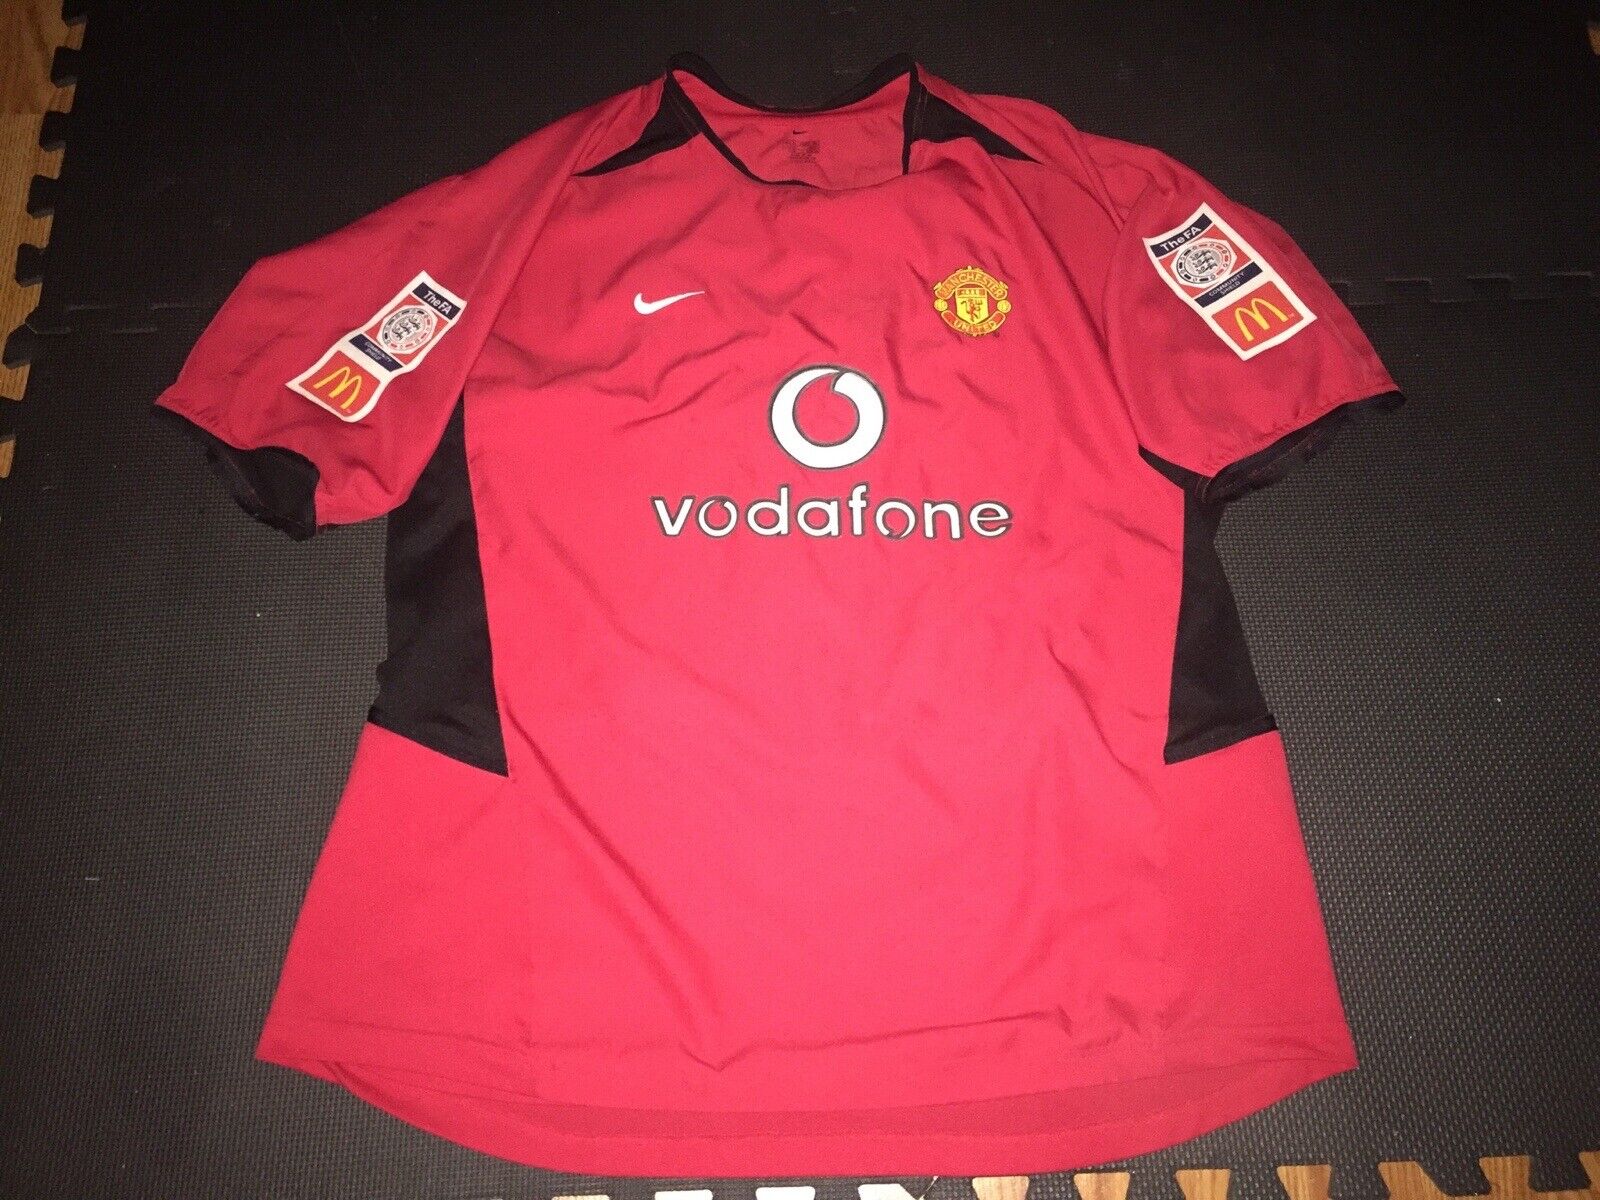 VTG MANCHESTER UNITED 2002 HOME JERSEY  # 11 GIGGS COMMUNITY SHIELD , SIZE XL AD